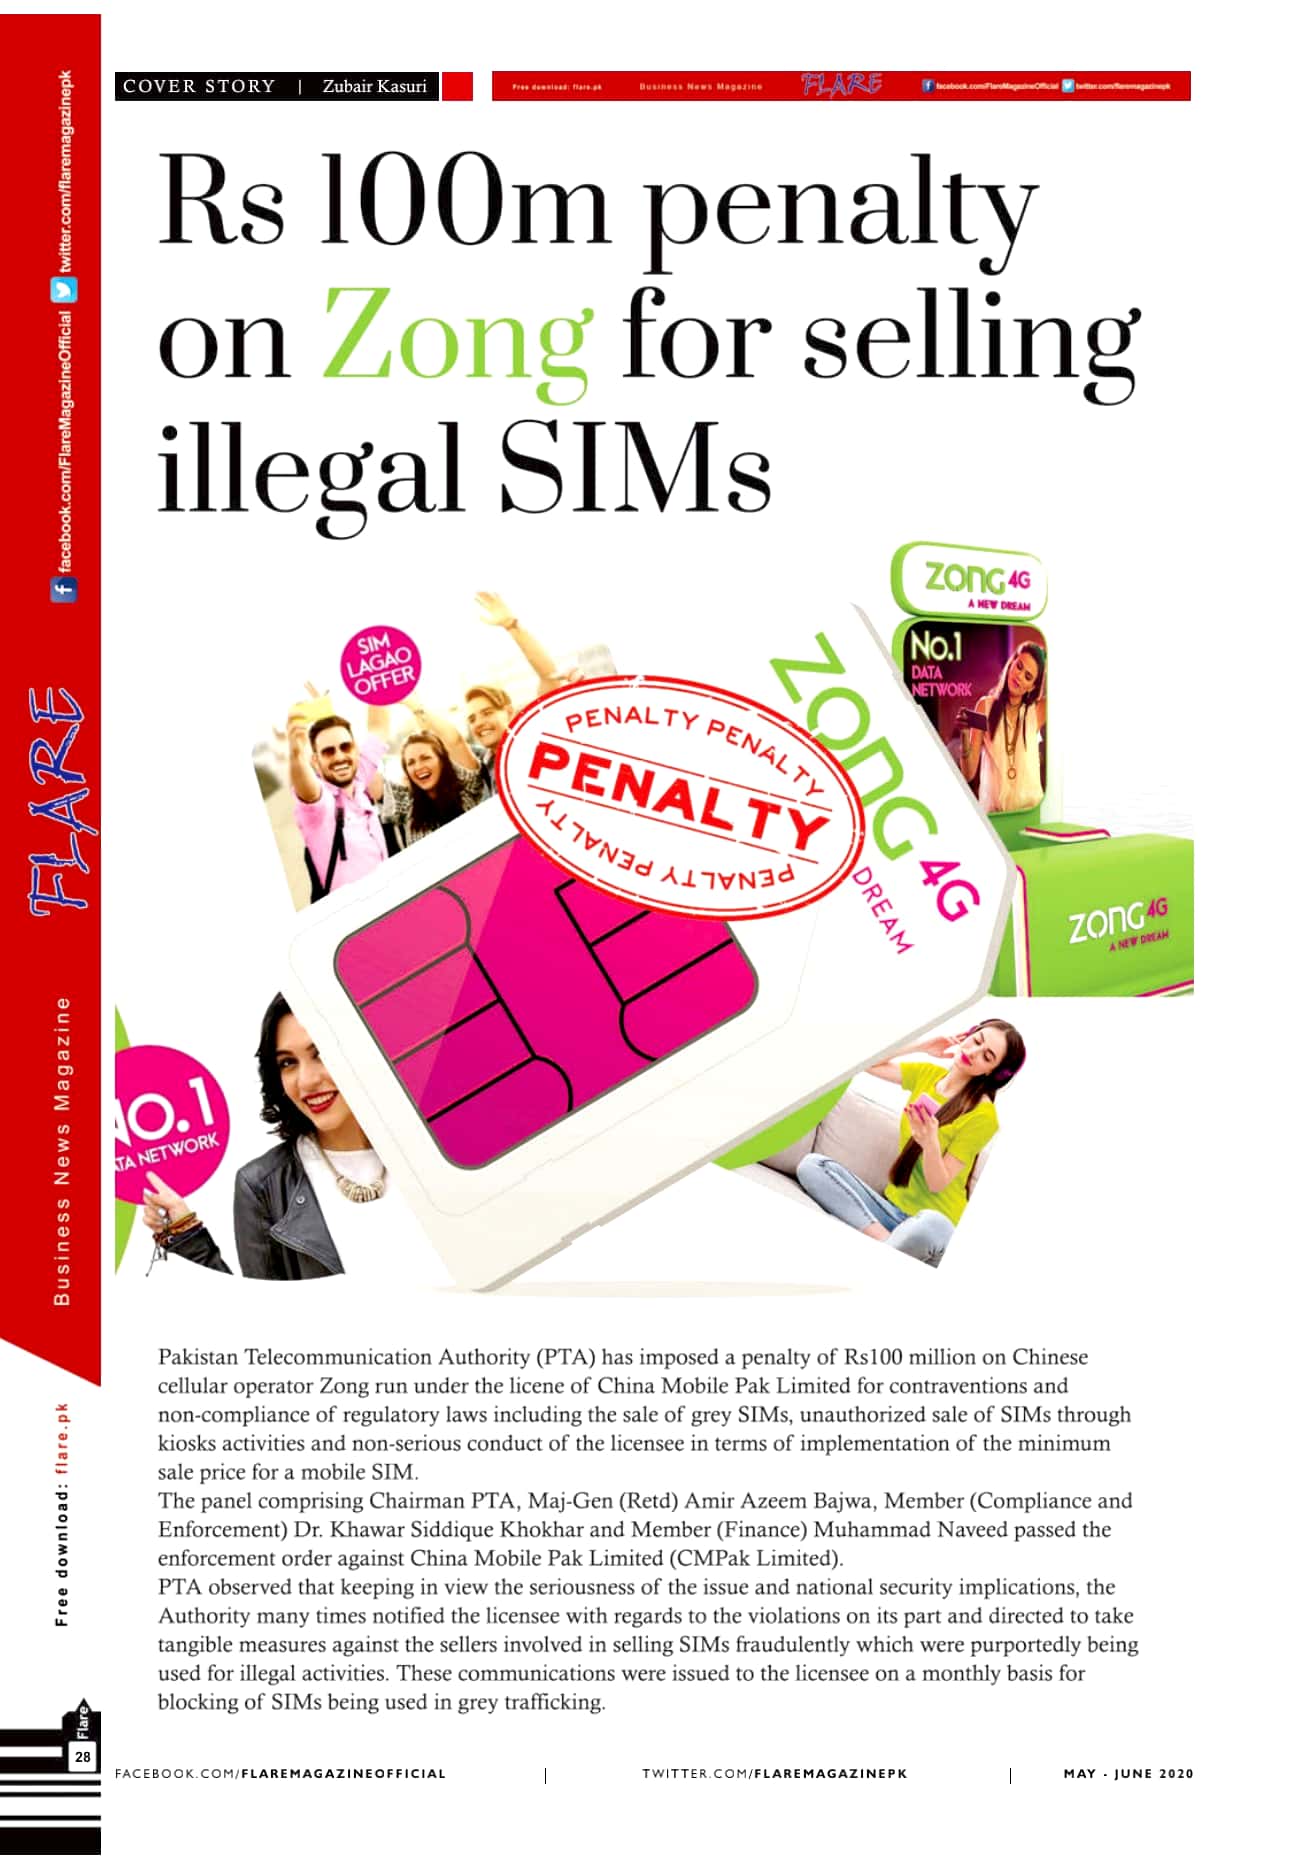 Rs 100m penalty on Zong for selling illegal SIMs